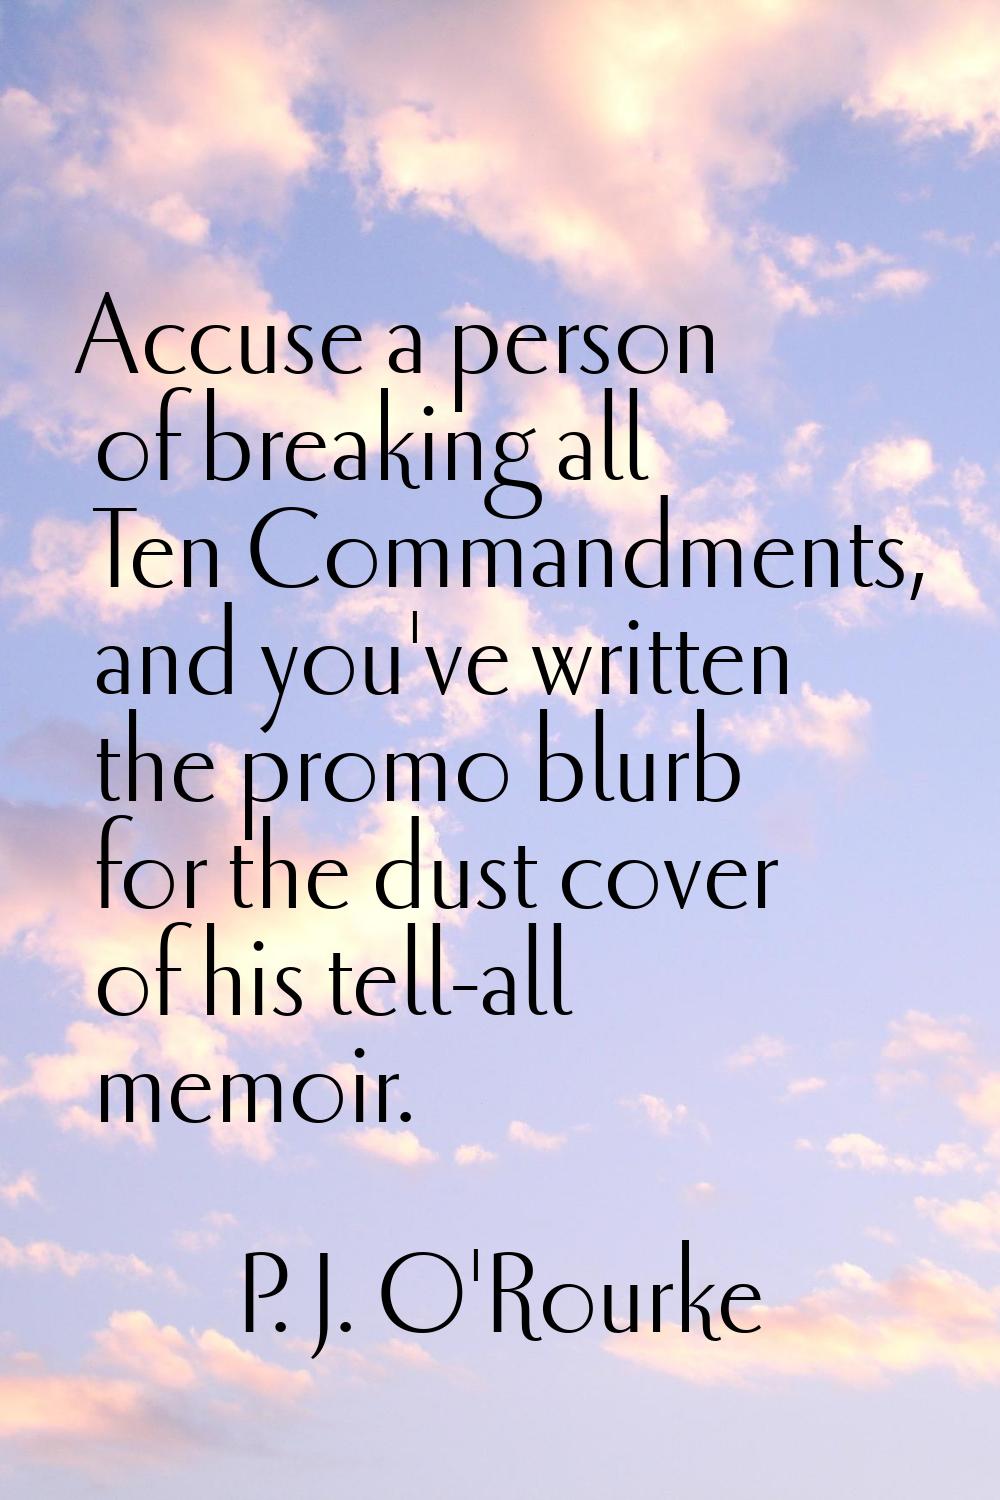 Accuse a person of breaking all Ten Commandments, and you've written the promo blurb for the dust c